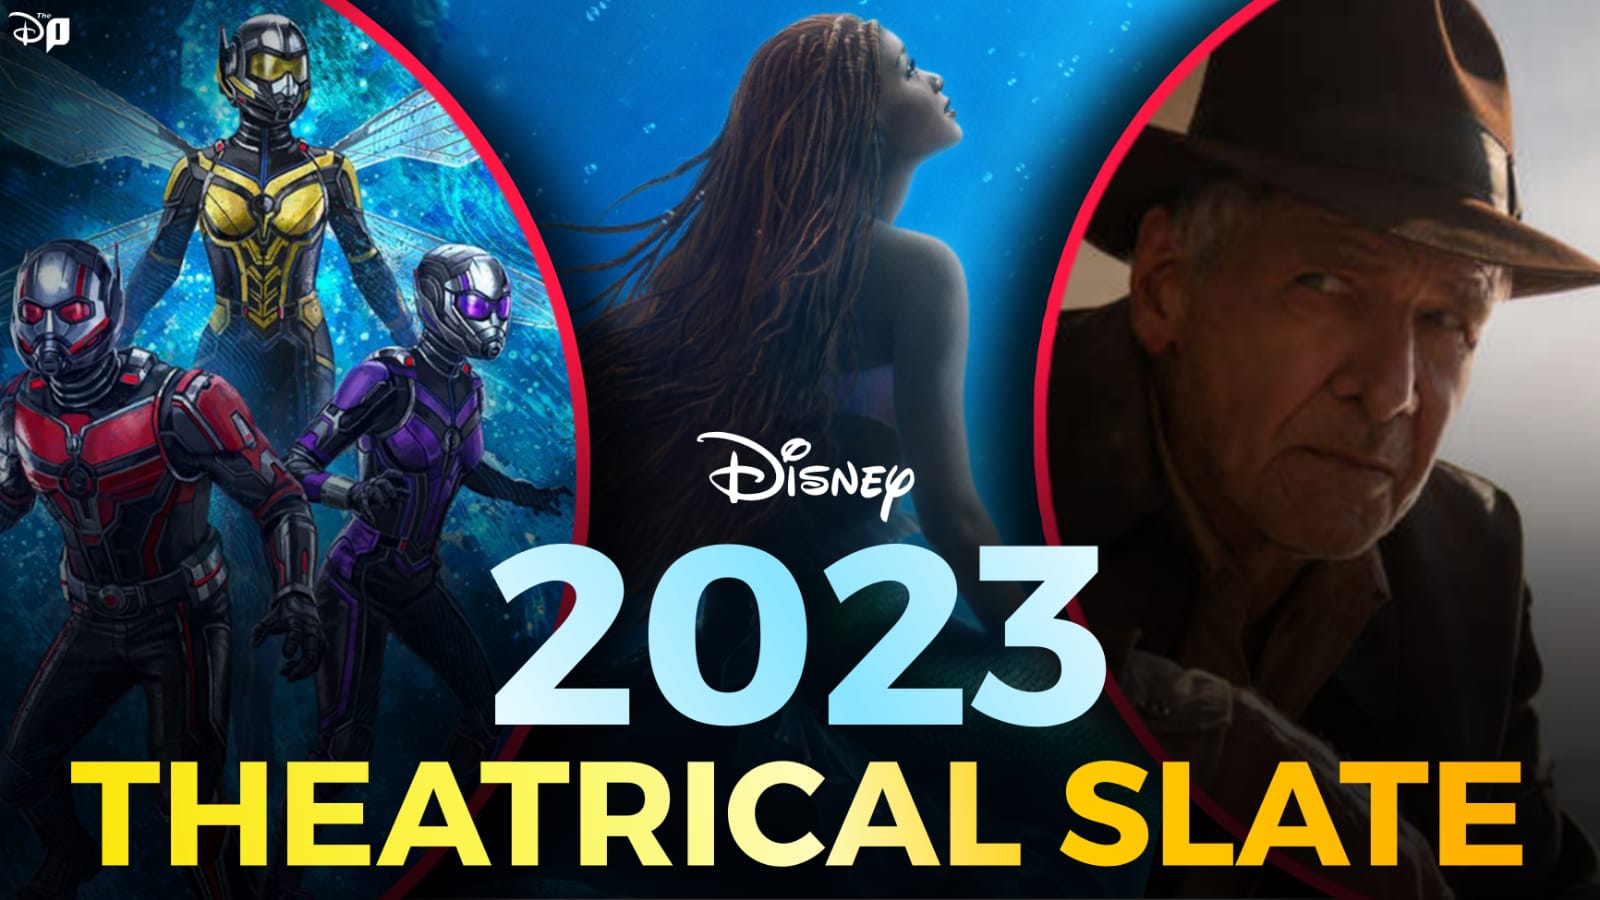 Disney’s 2023 Theatrical Slate Preview